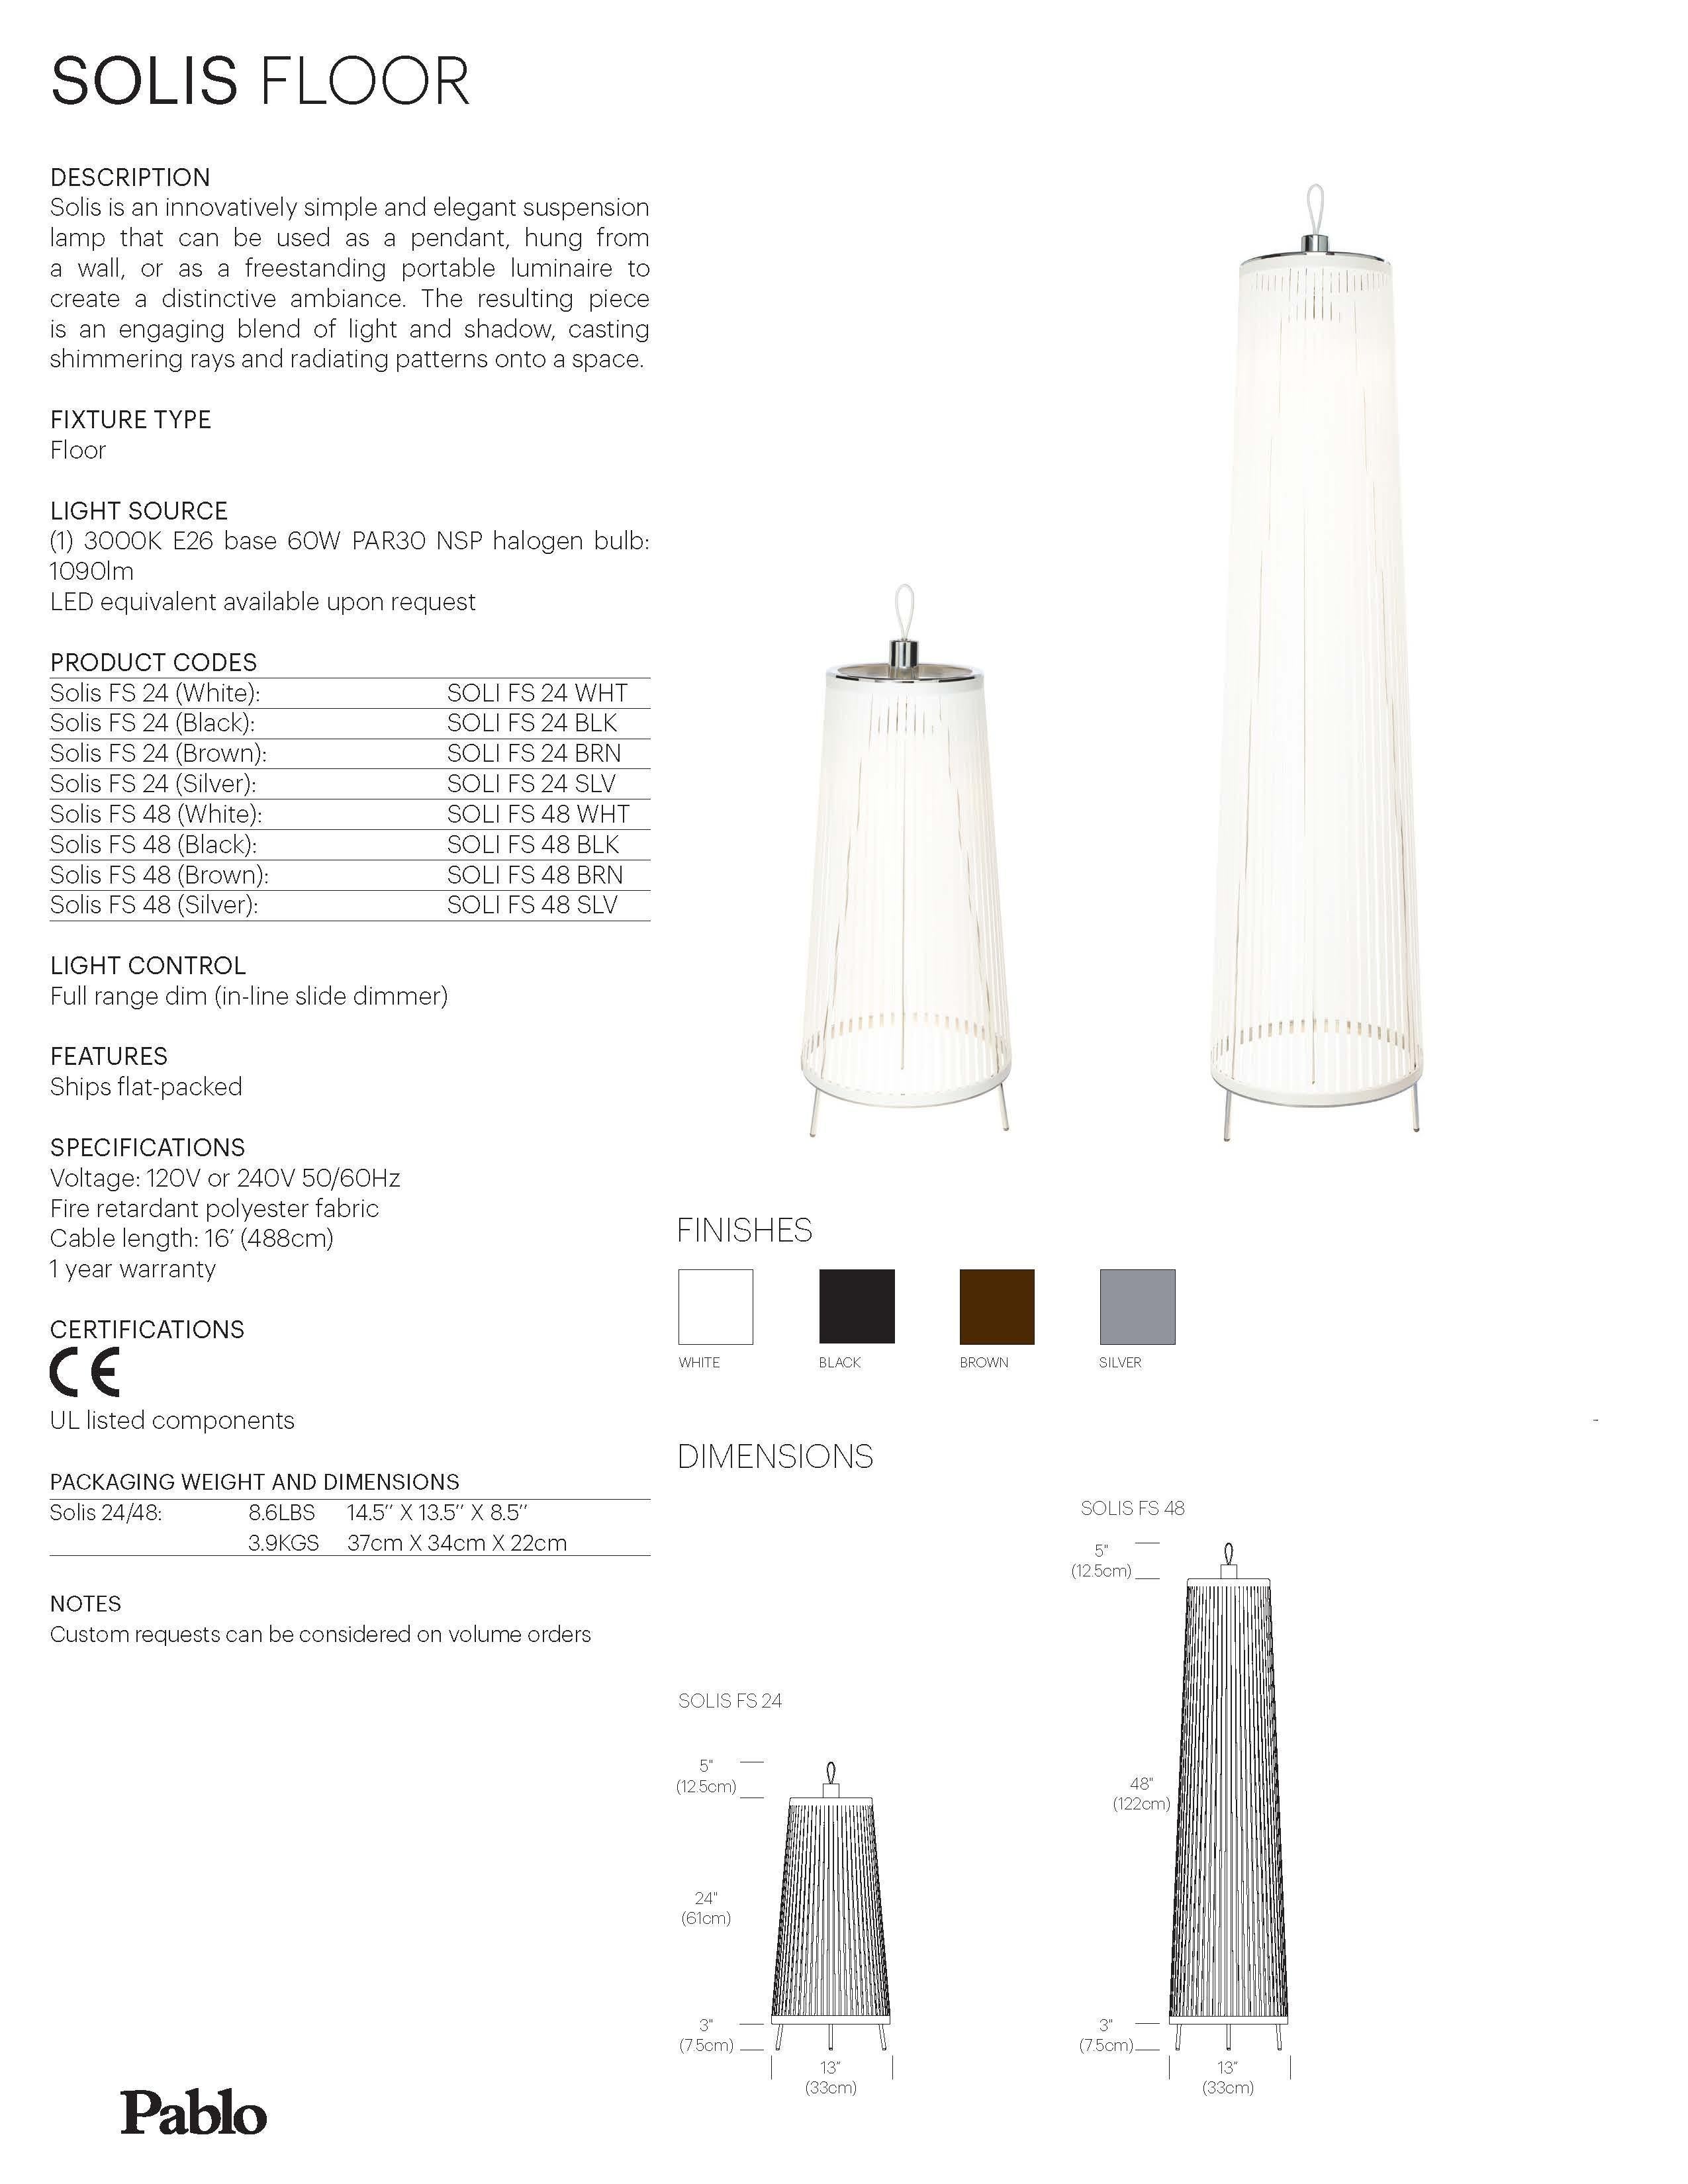 Contemporary Solis 48 Freestanding Lamp in White by Pablo Designs